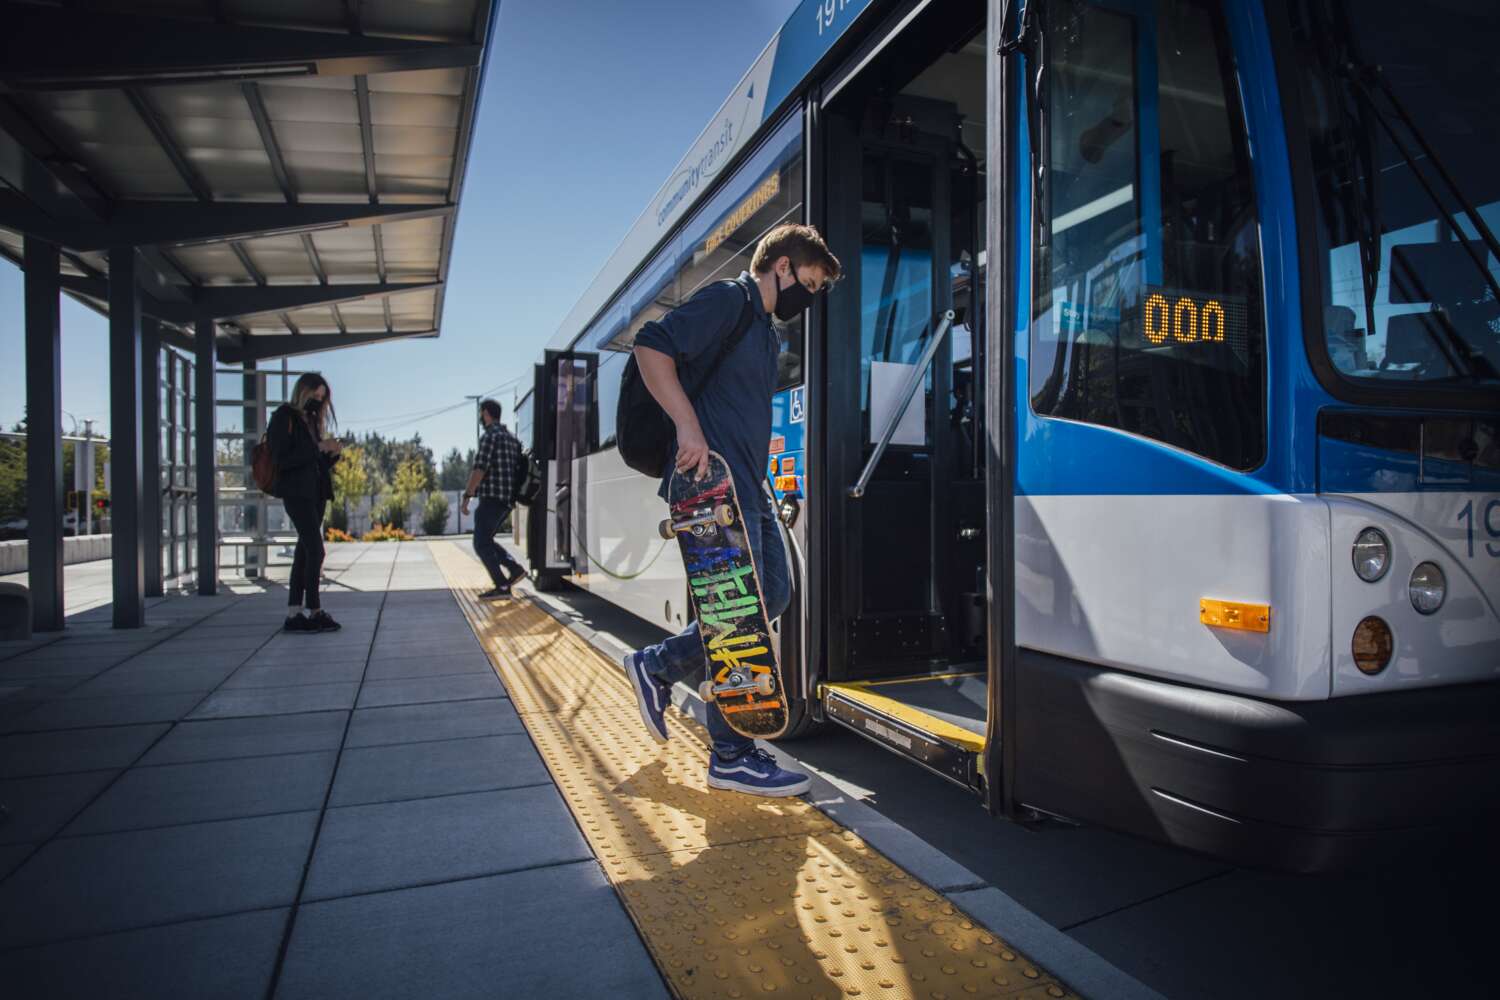 Young man with a skateboard enters a Community Transit bus